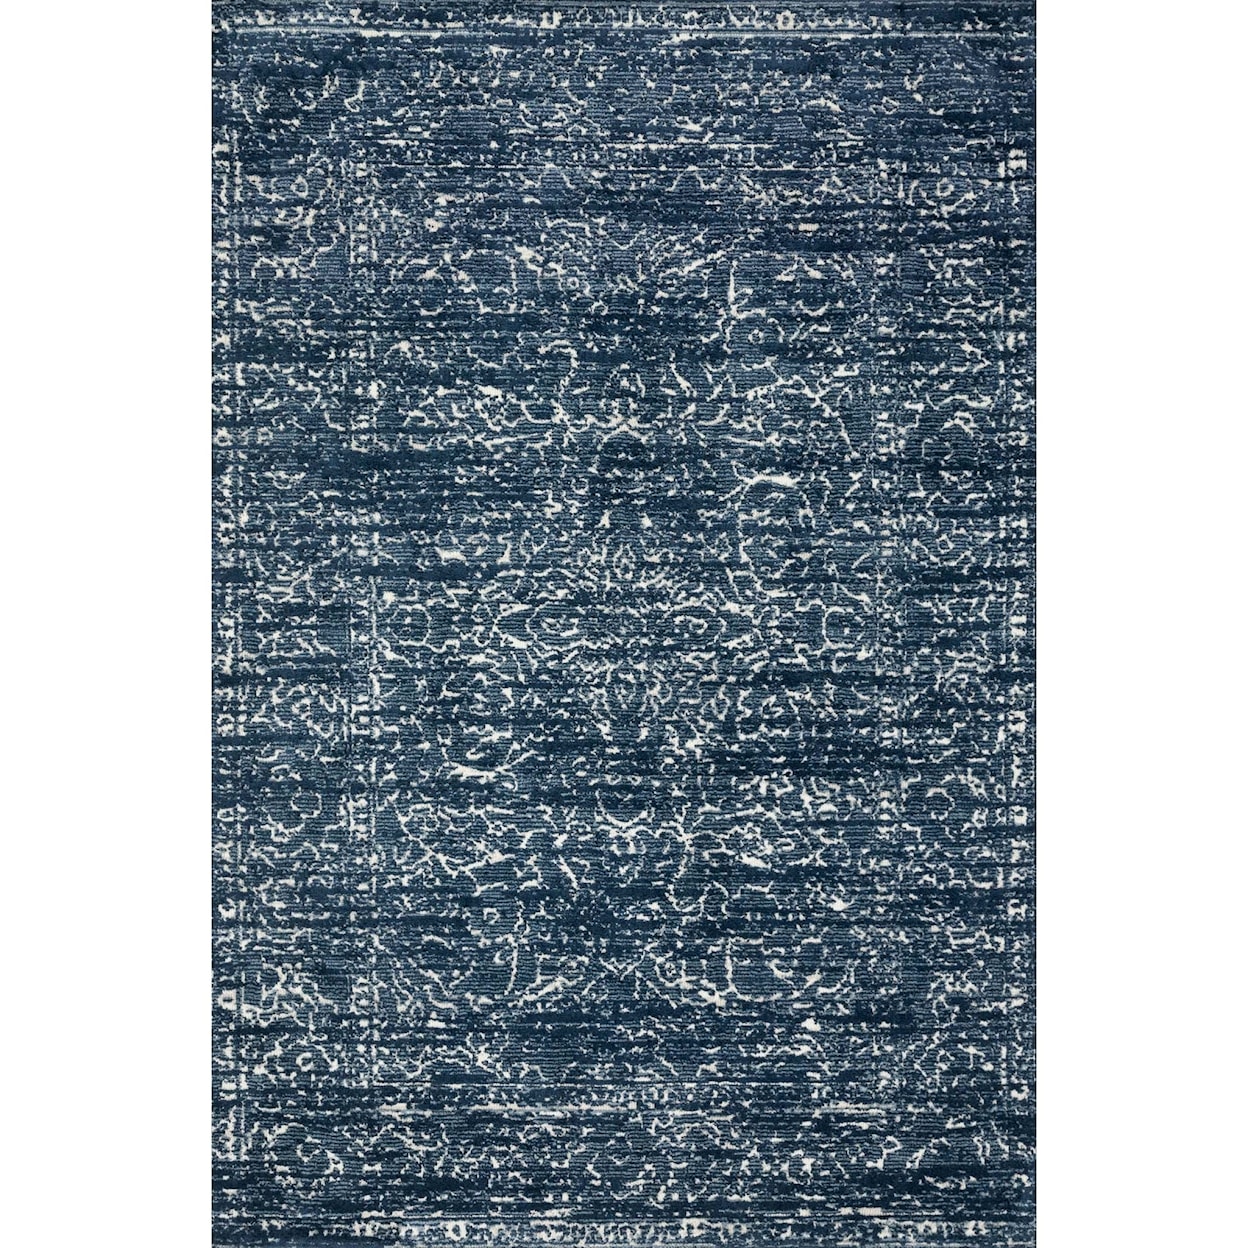 Magnolia Home by Joanna Gaines for Loloi Lotus 9'-3" x 13' Rug